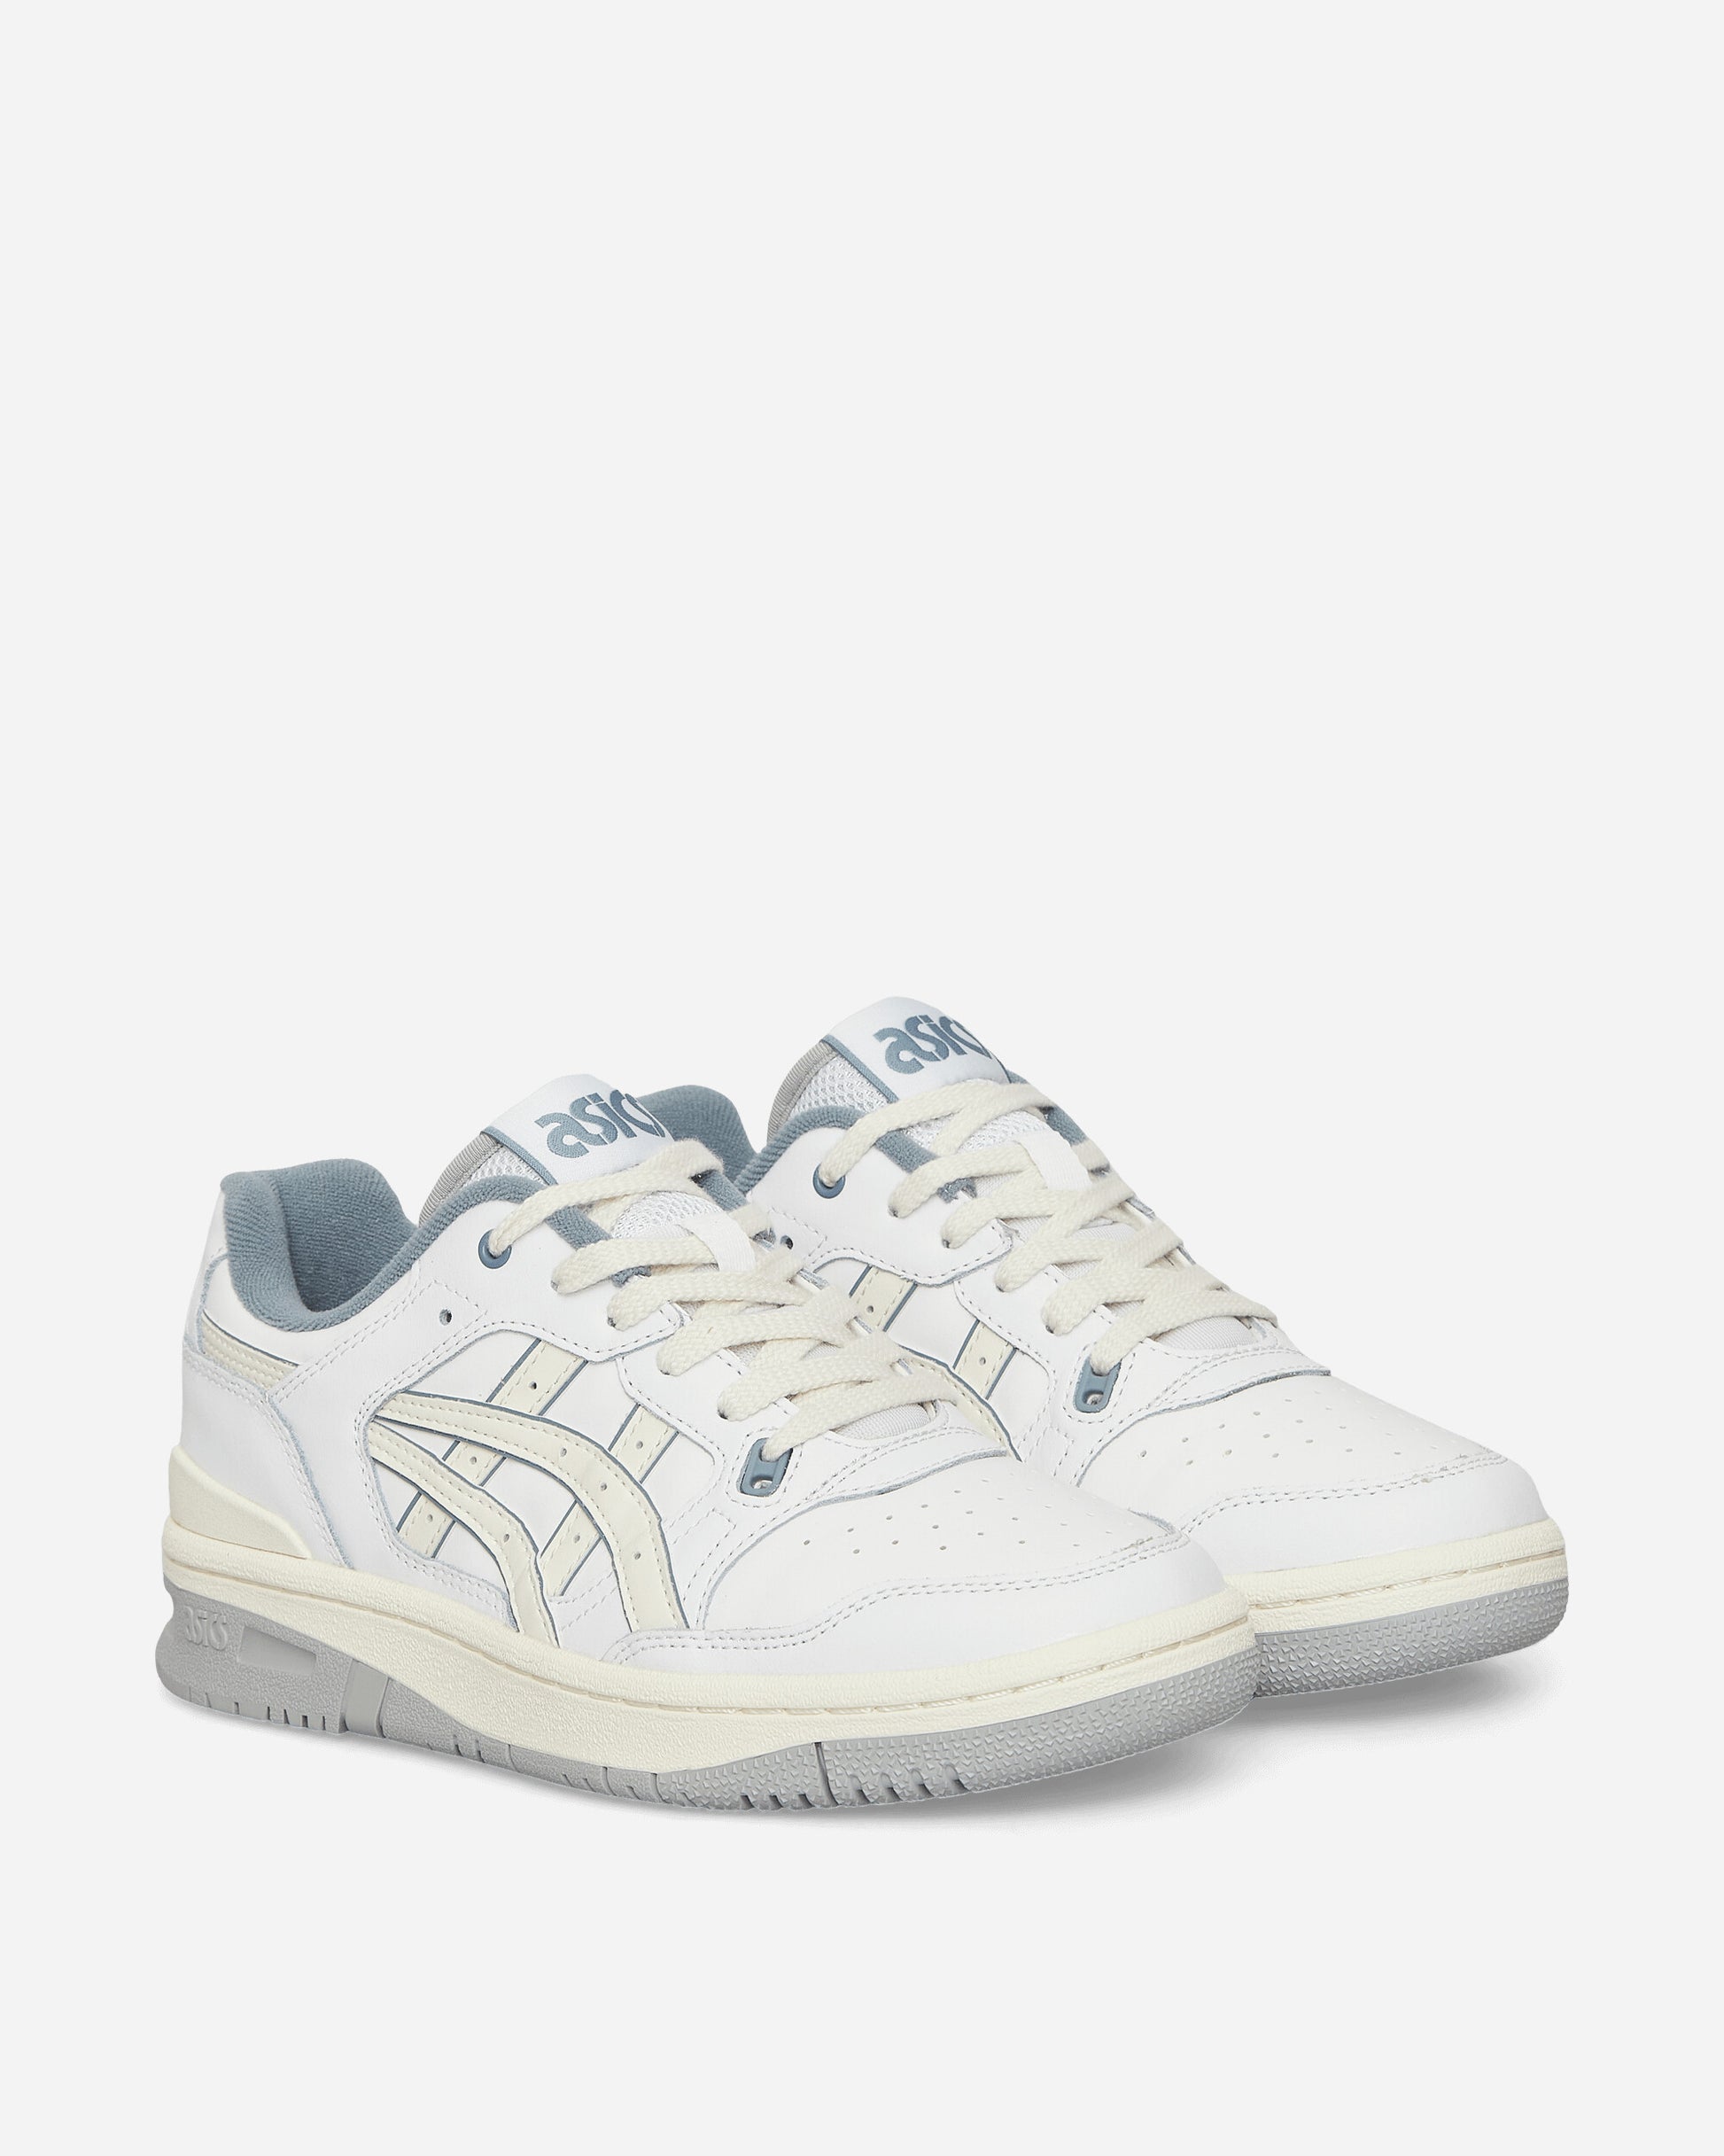 Asics Ex89 White/Cream Sneakers Low 1203A384-104